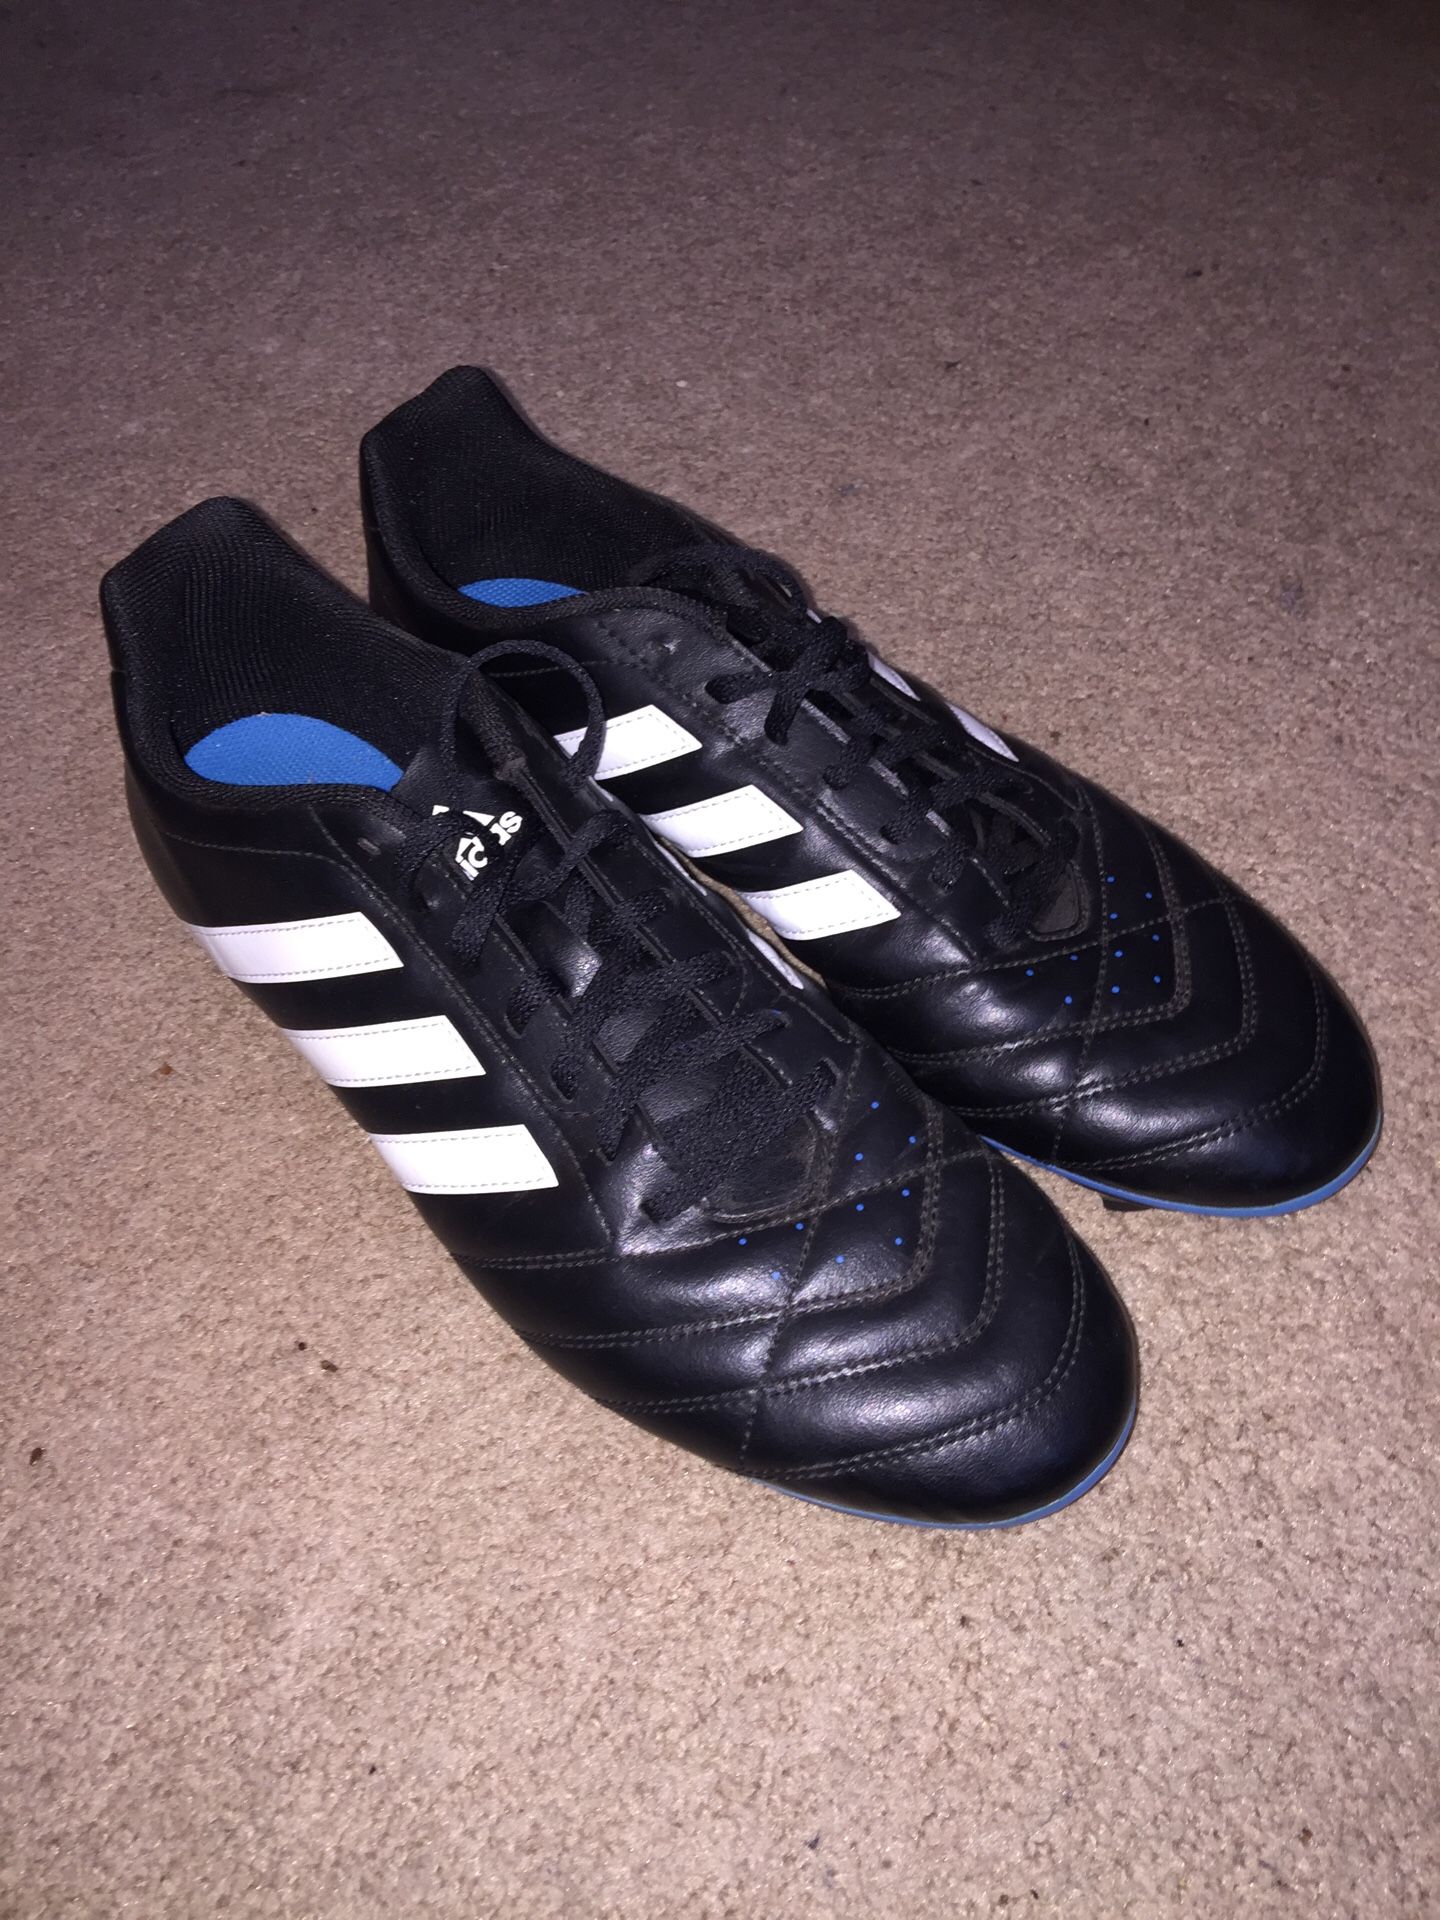 Adidas men’s soccer cleats size 13